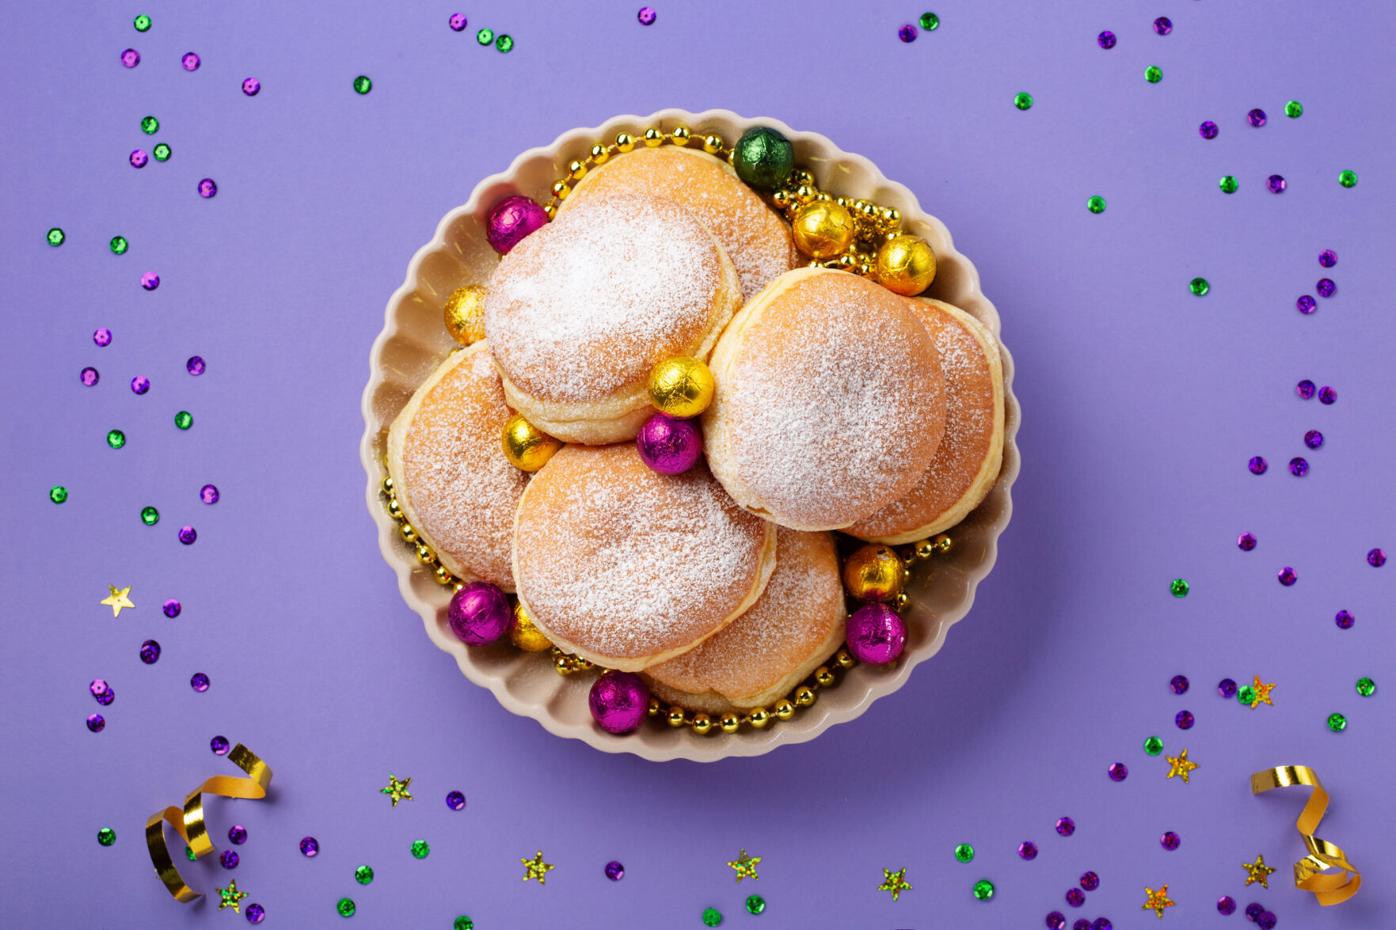 Celebrate Mardi Gras With Recipes From The Oldest Bean Company In The U.S.